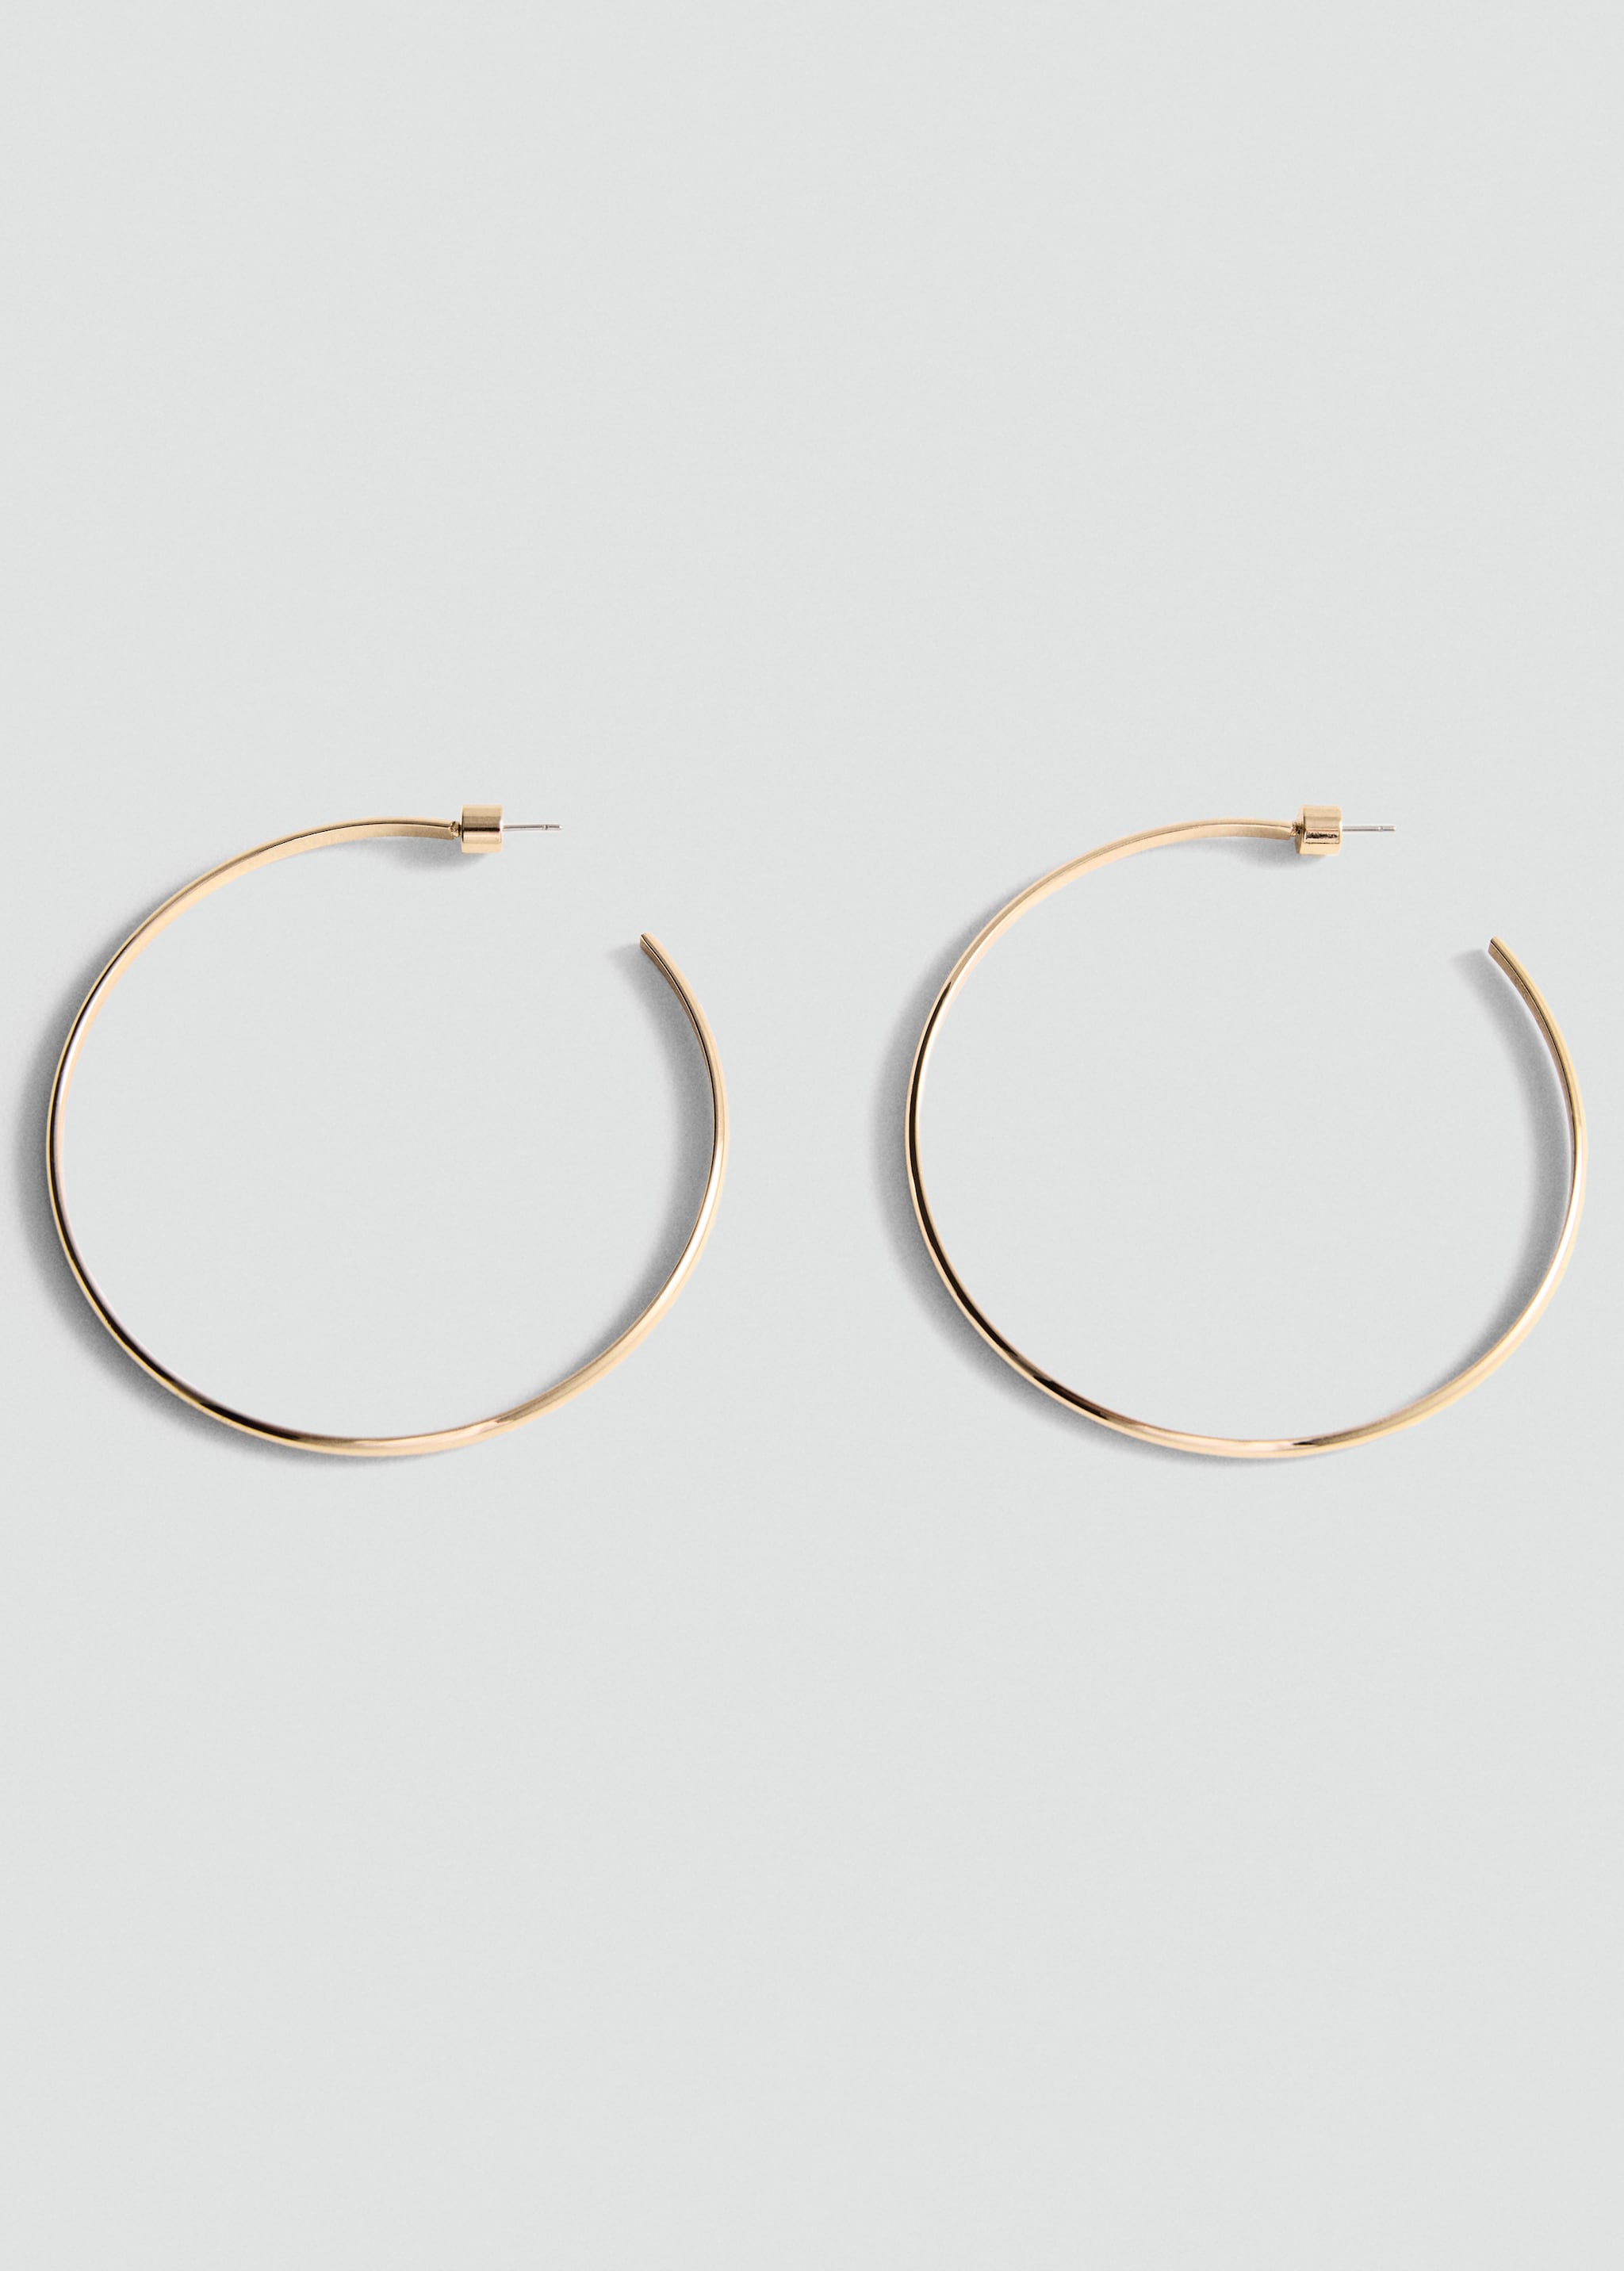 Maxi hoop earrings - Article without model